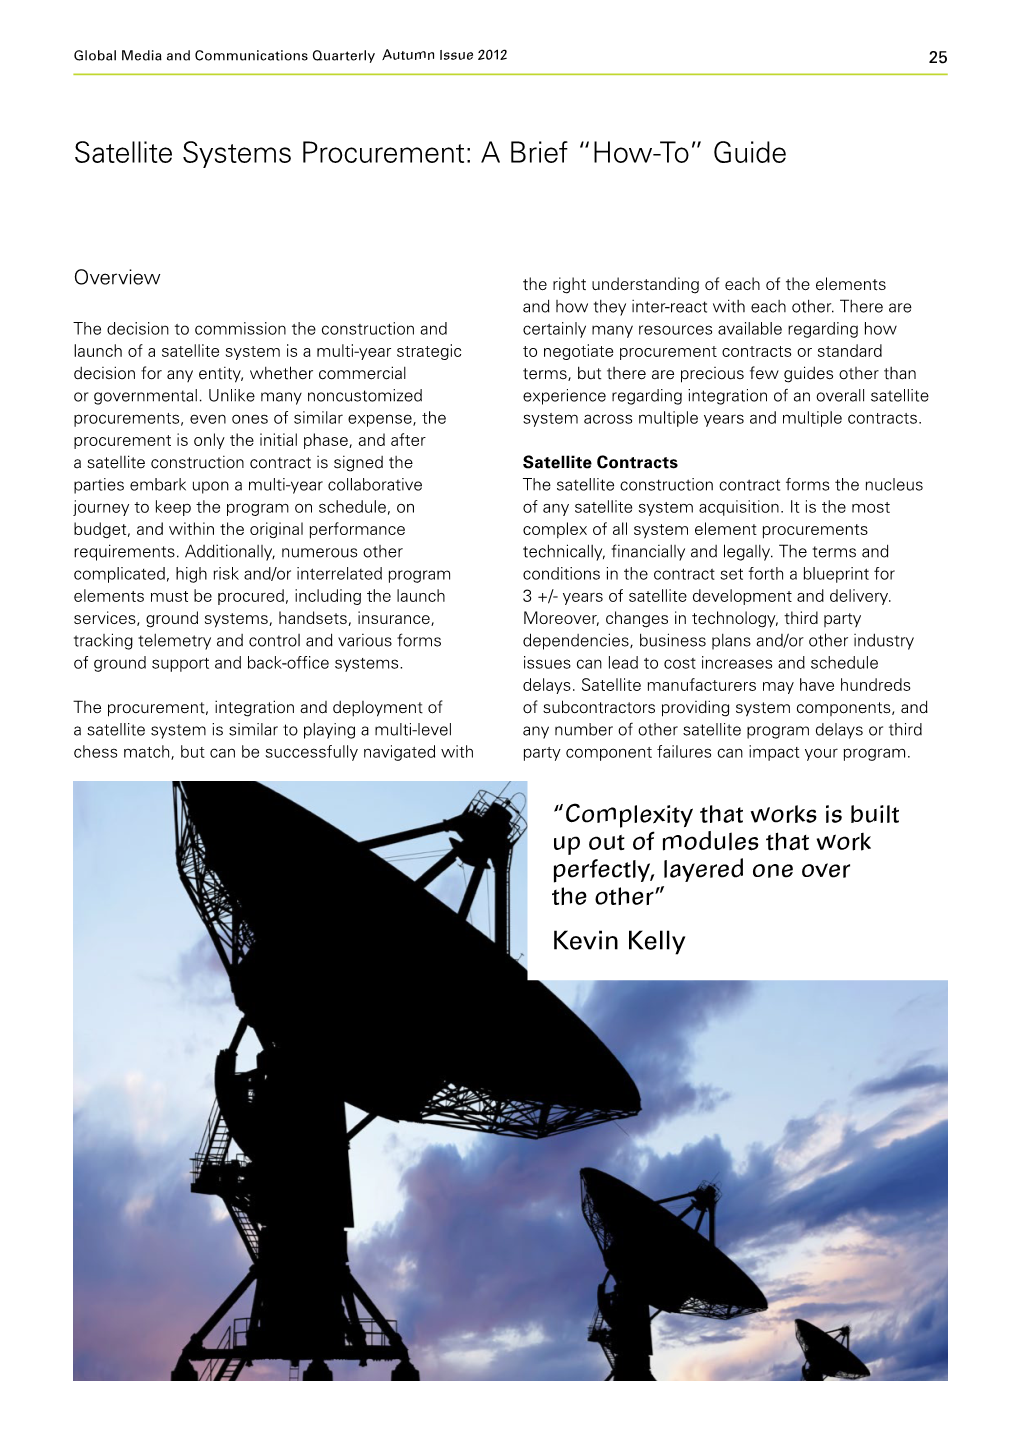 Satellite Systems Procurement: a Brief "How-To" Guide